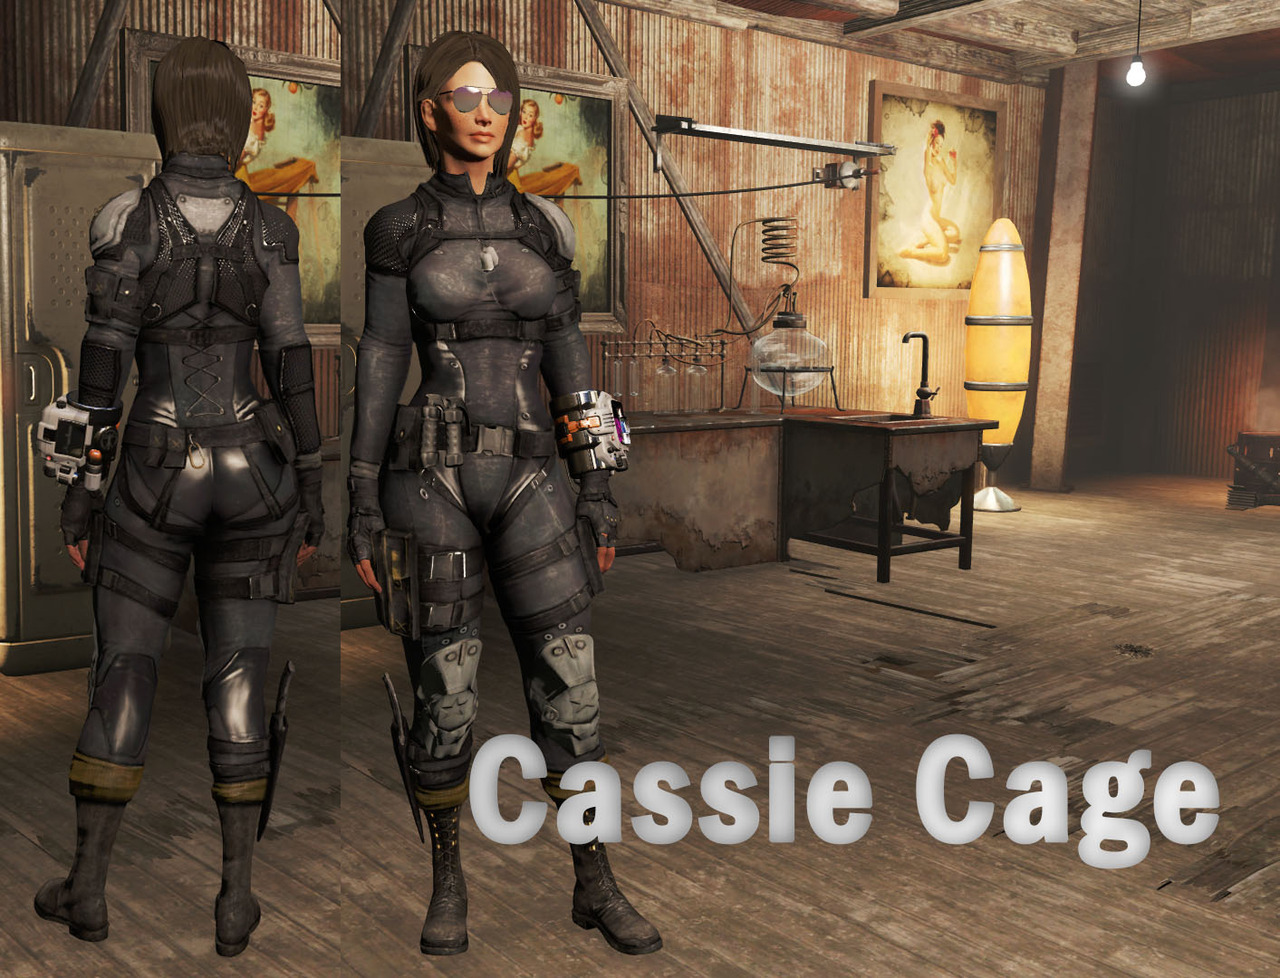 Bazoongas Workshop Cassie Cage Armor Mod Cbbe Bodislide Support 2